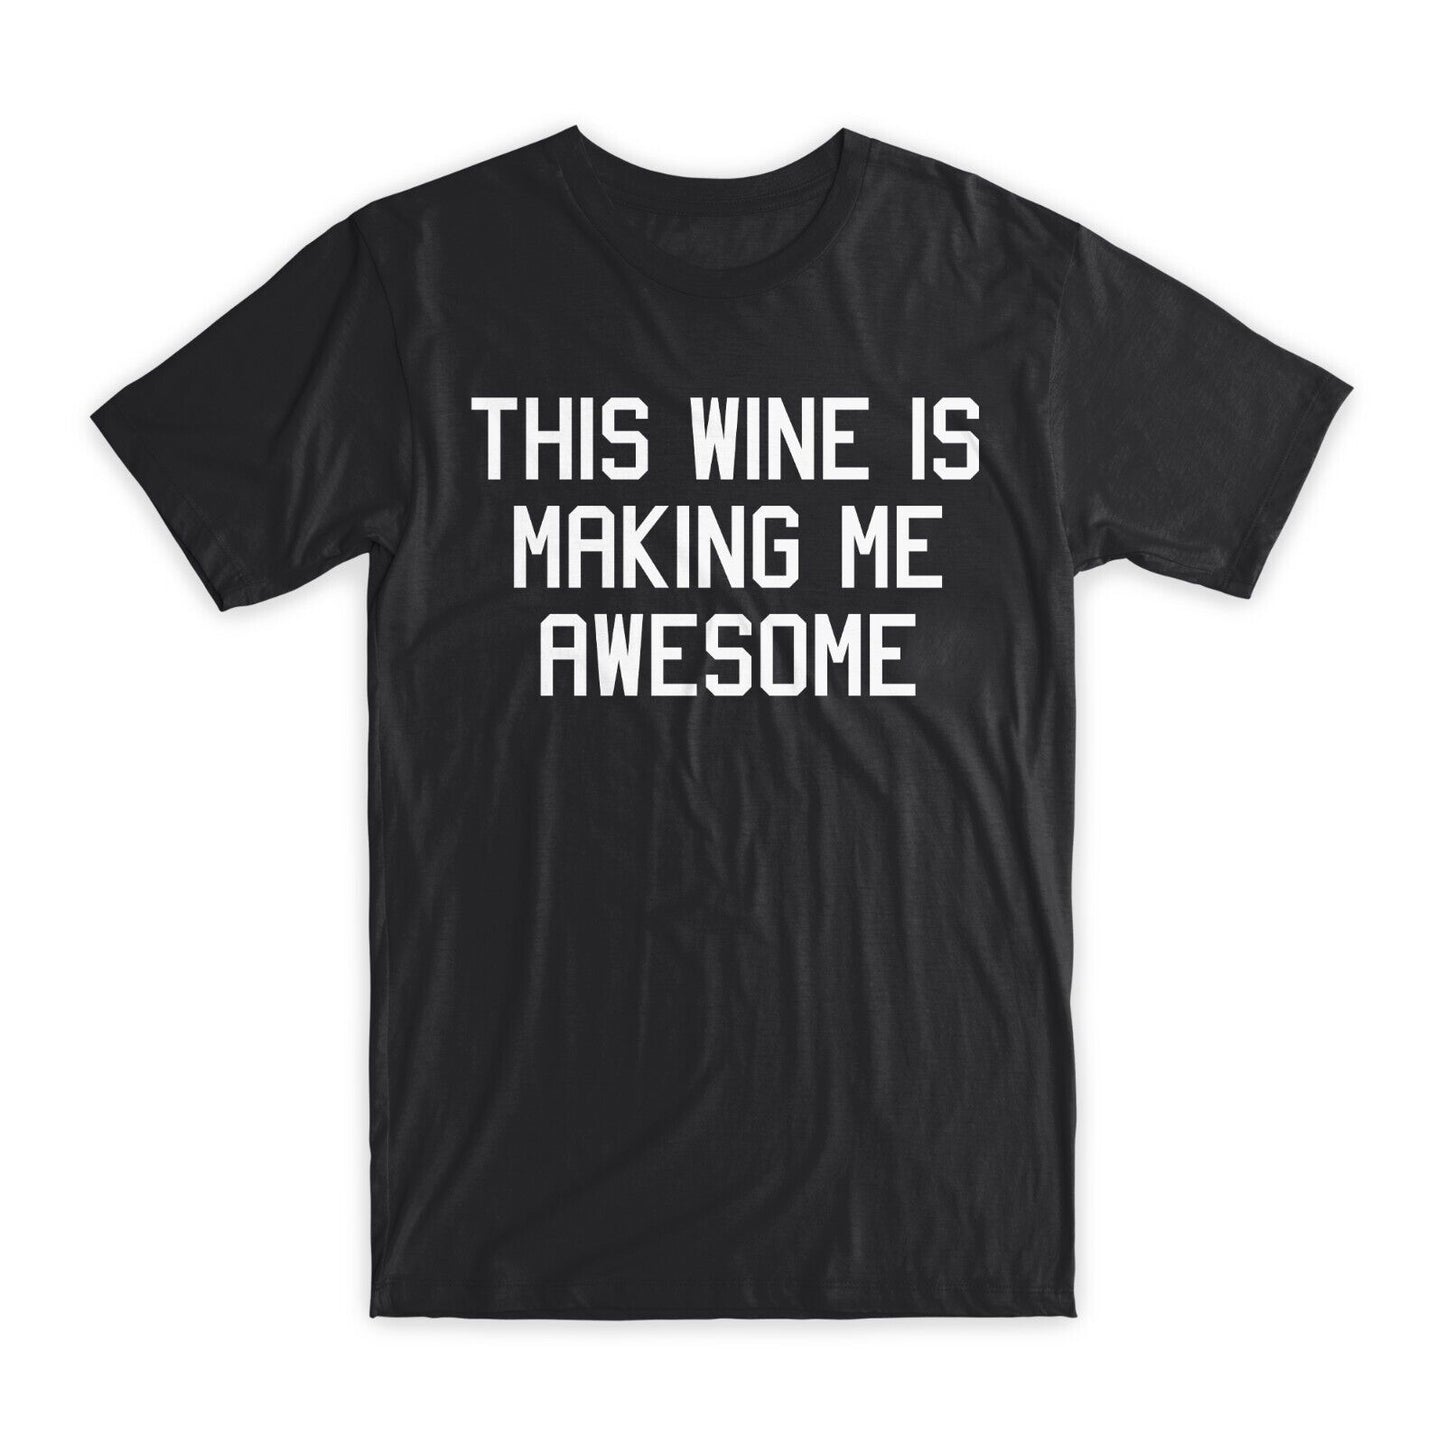 This Wine is Making Me Awesome T-Shirt Premium Soft Cotton Funny Tees Gifts NEW